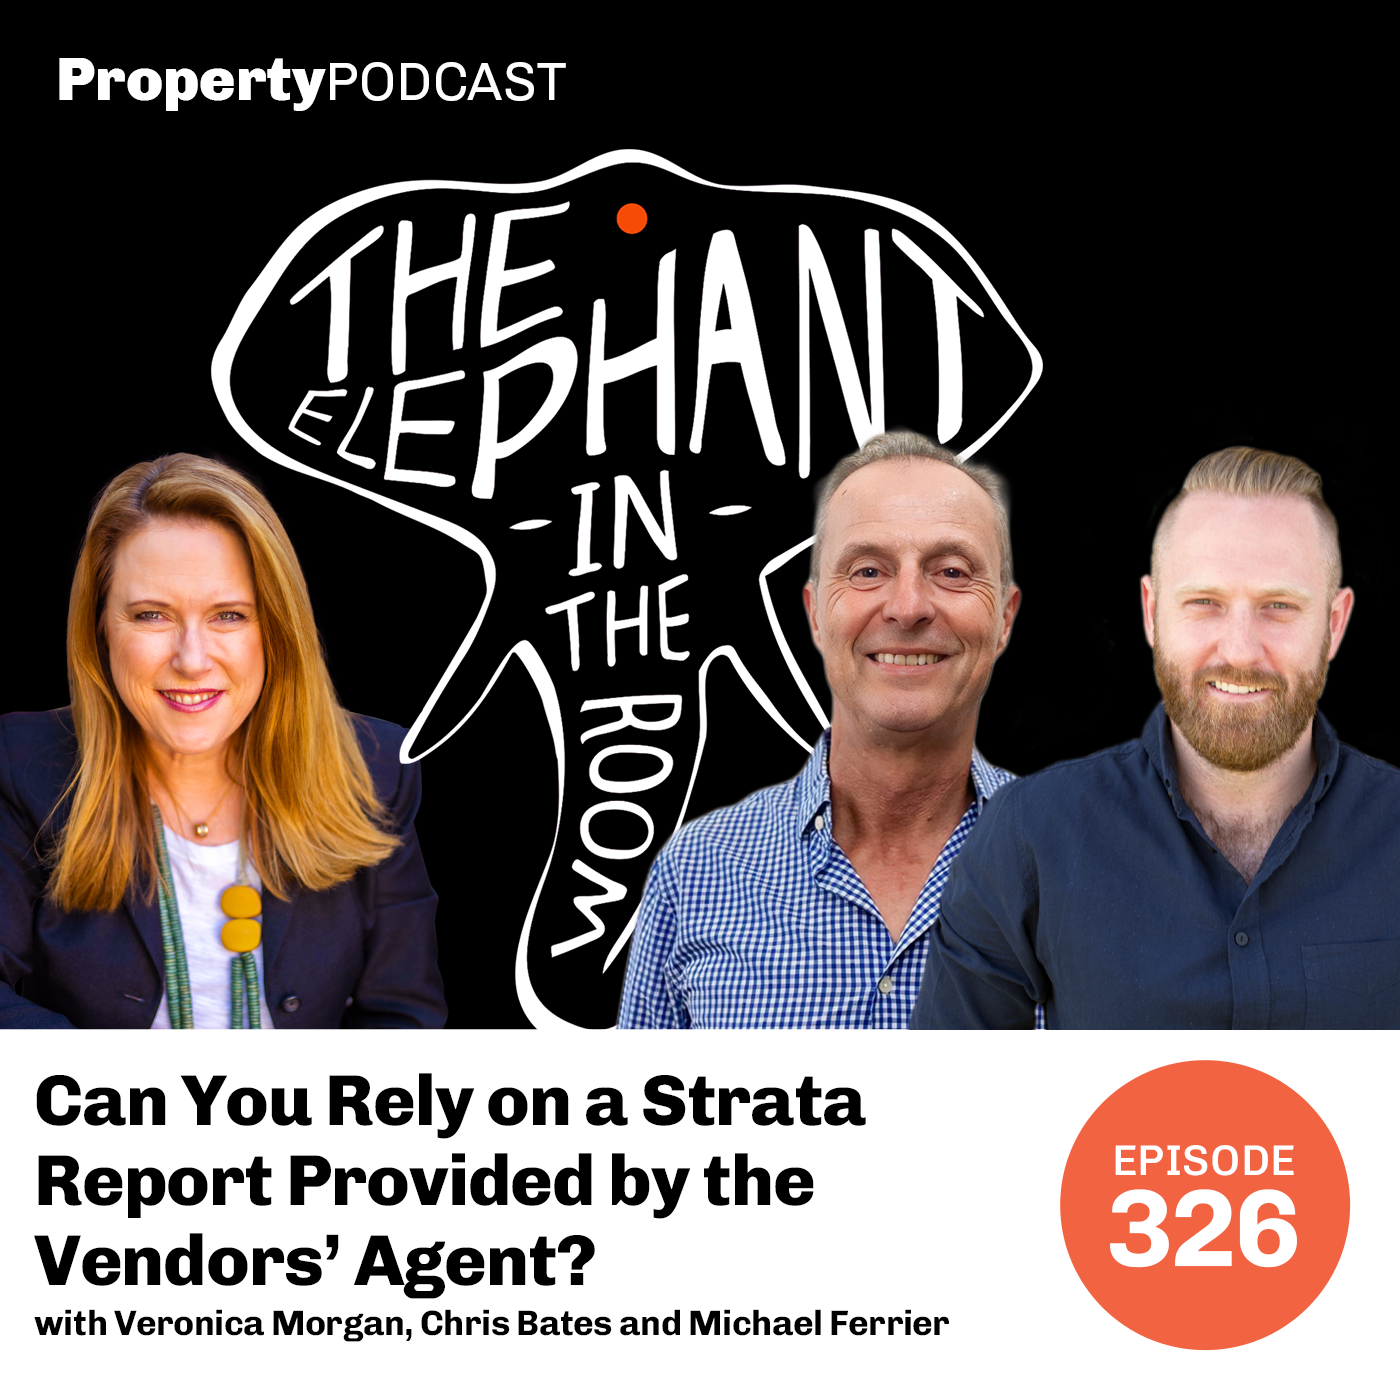 Can You Rely on a Strata Report Provided by the Vendors’ Agent?